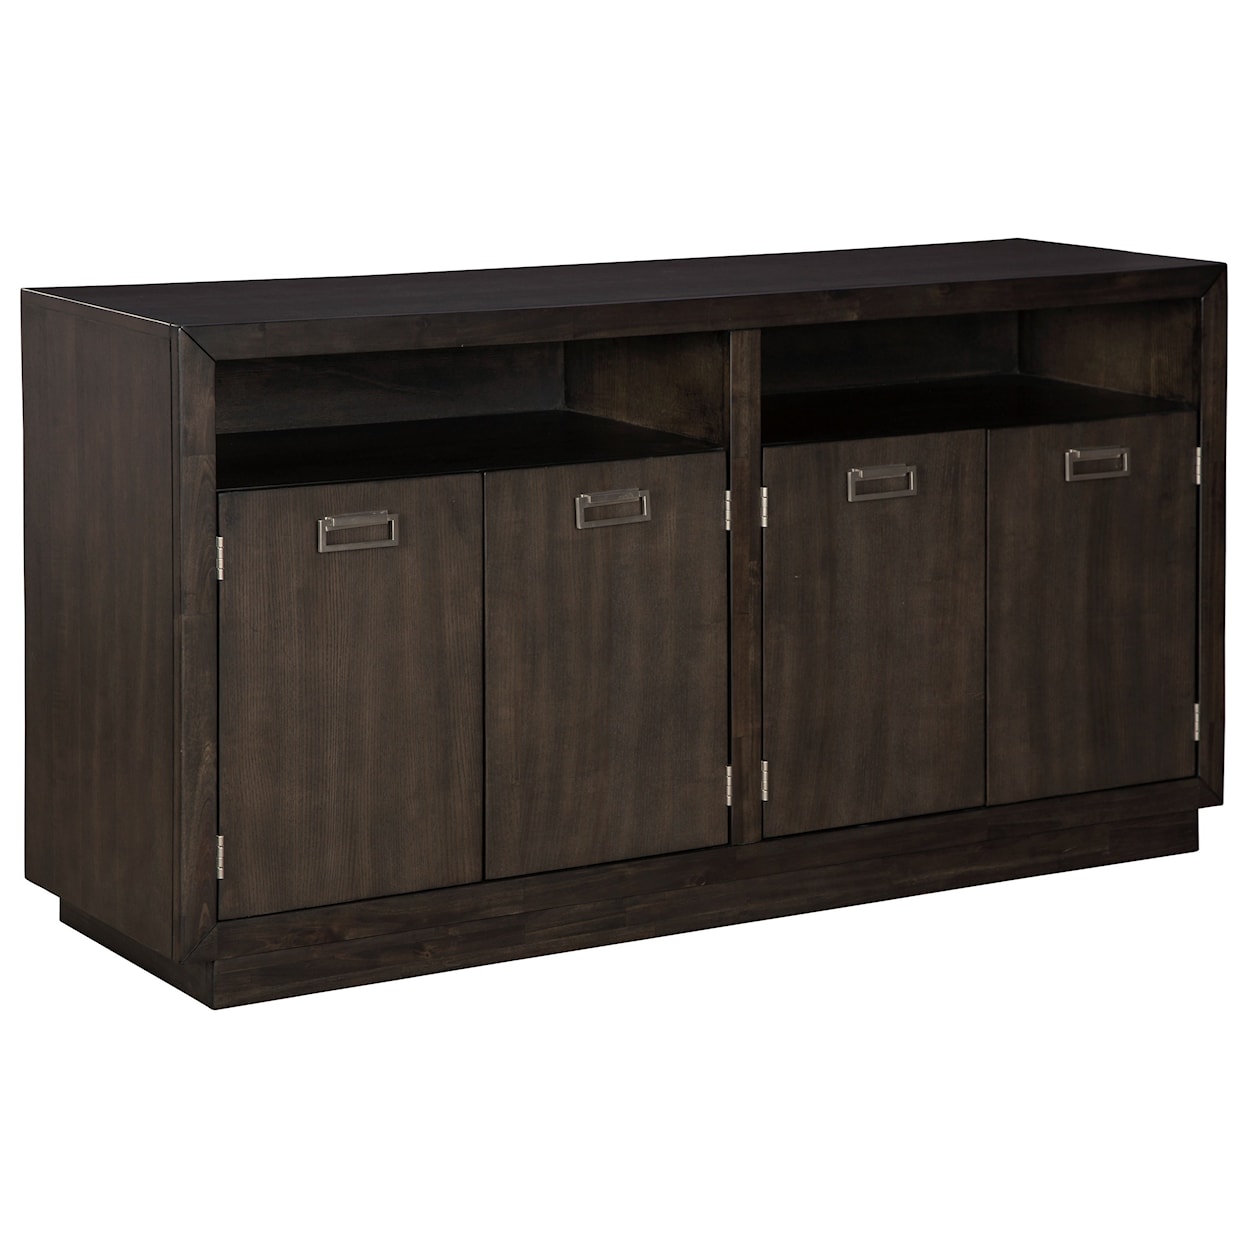 Signature Design by Ashley Hyndell Dining Room Server